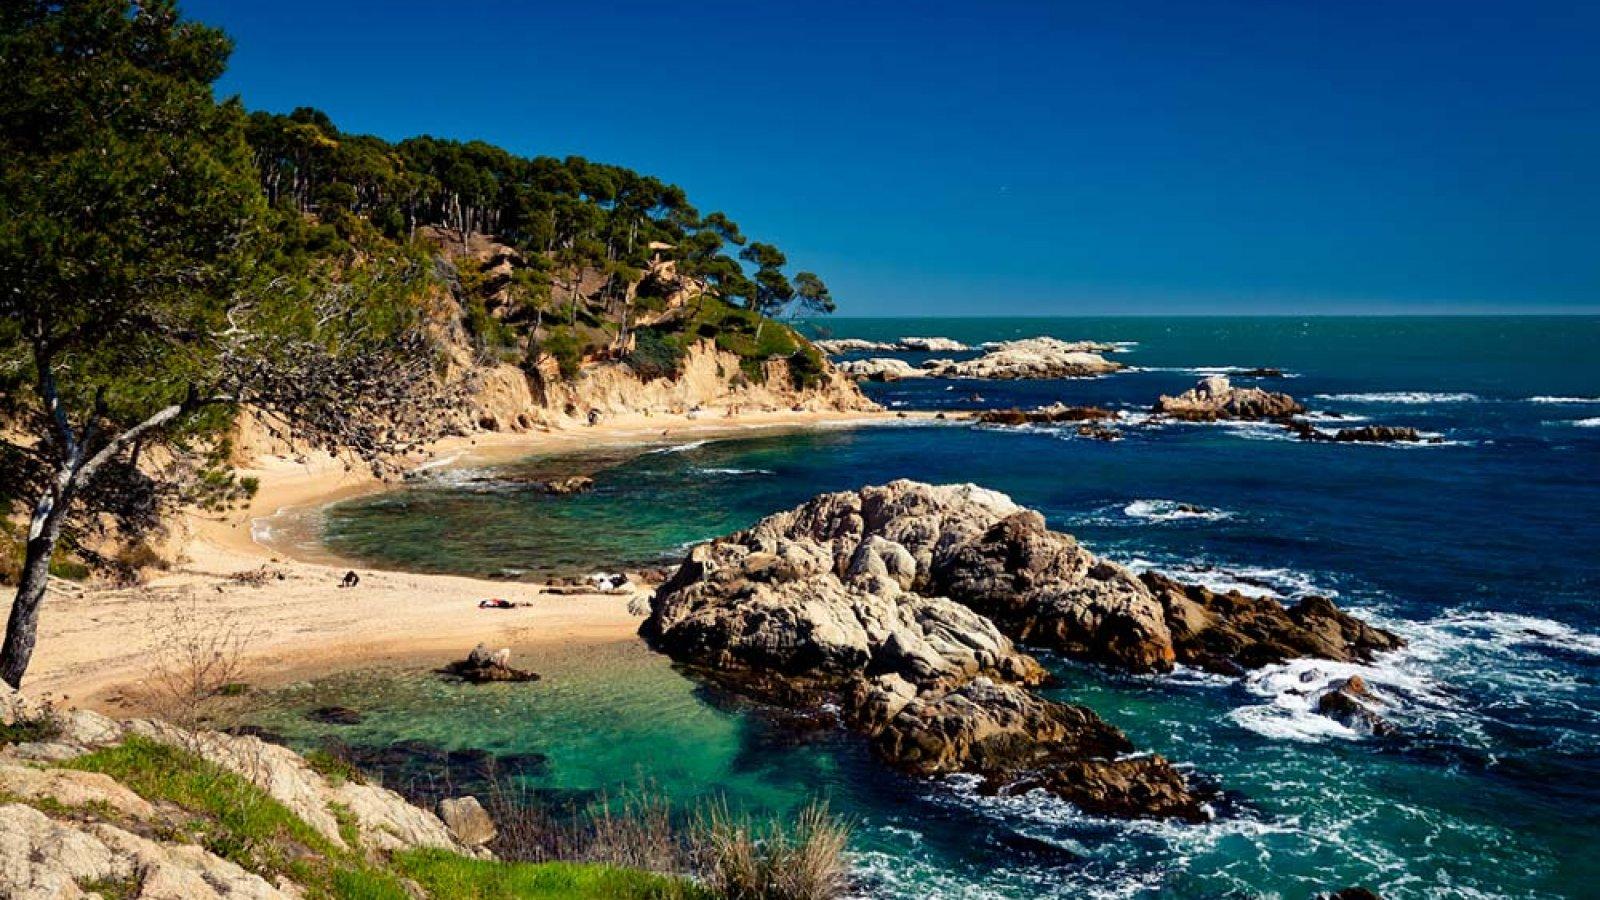 Getaway to Costa Brava. Tips and news for students in Barcelona